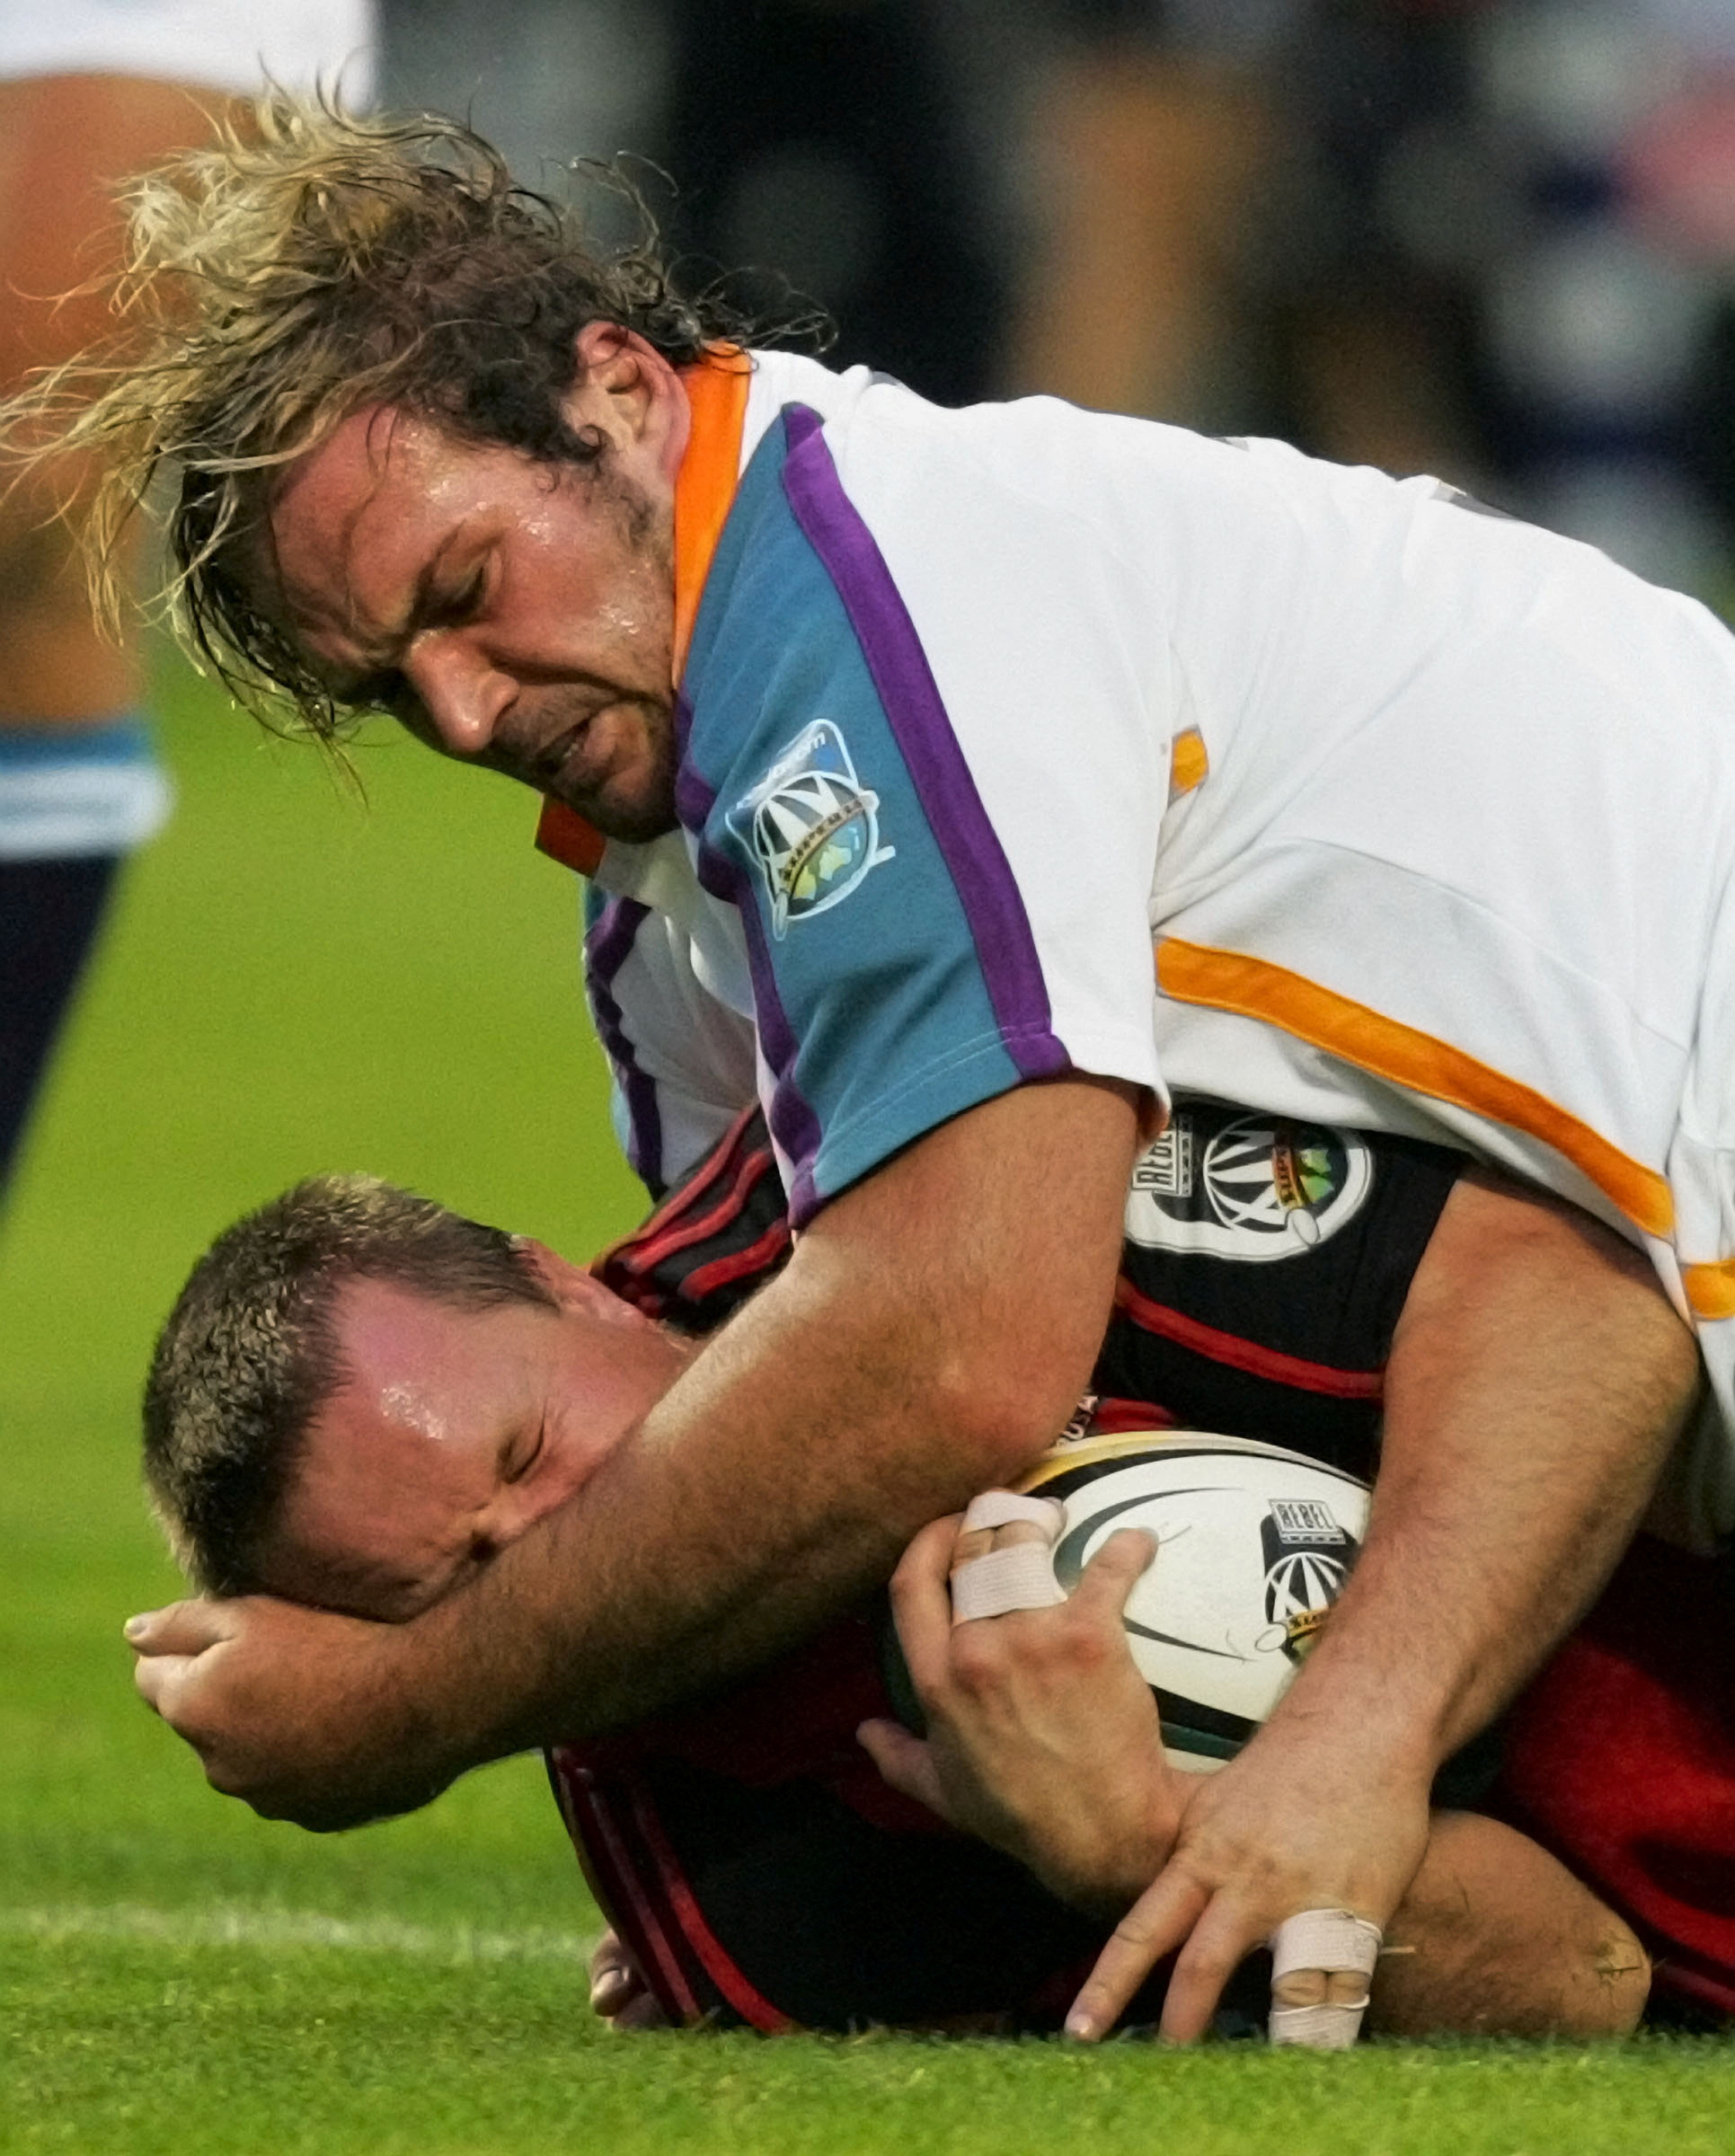 Crusaders' Johnstone gets hit in high tackle from Cheetahs' du Plessis during their Super 14 rugby clash in Christchurch